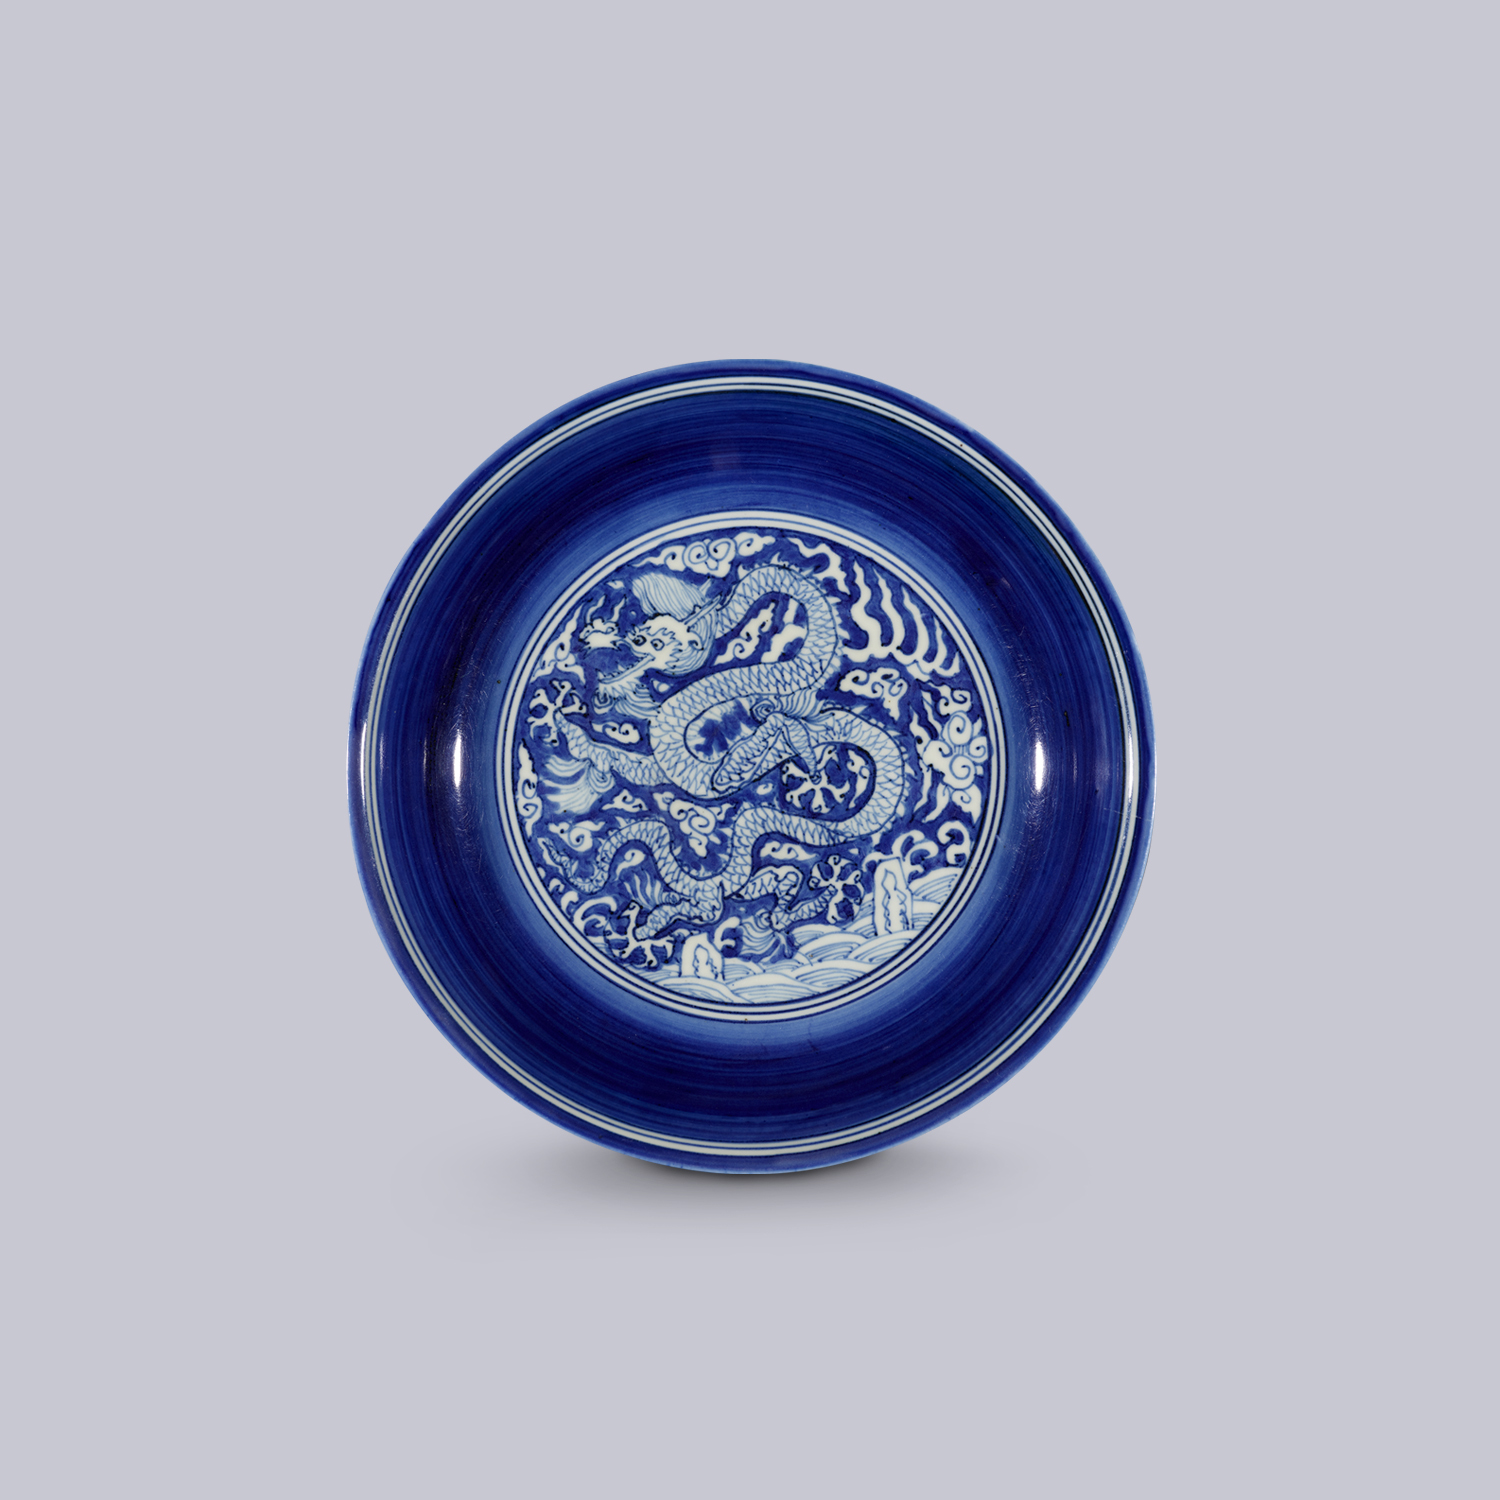 Dish with dragon amidst clouds and waves design on blue ground